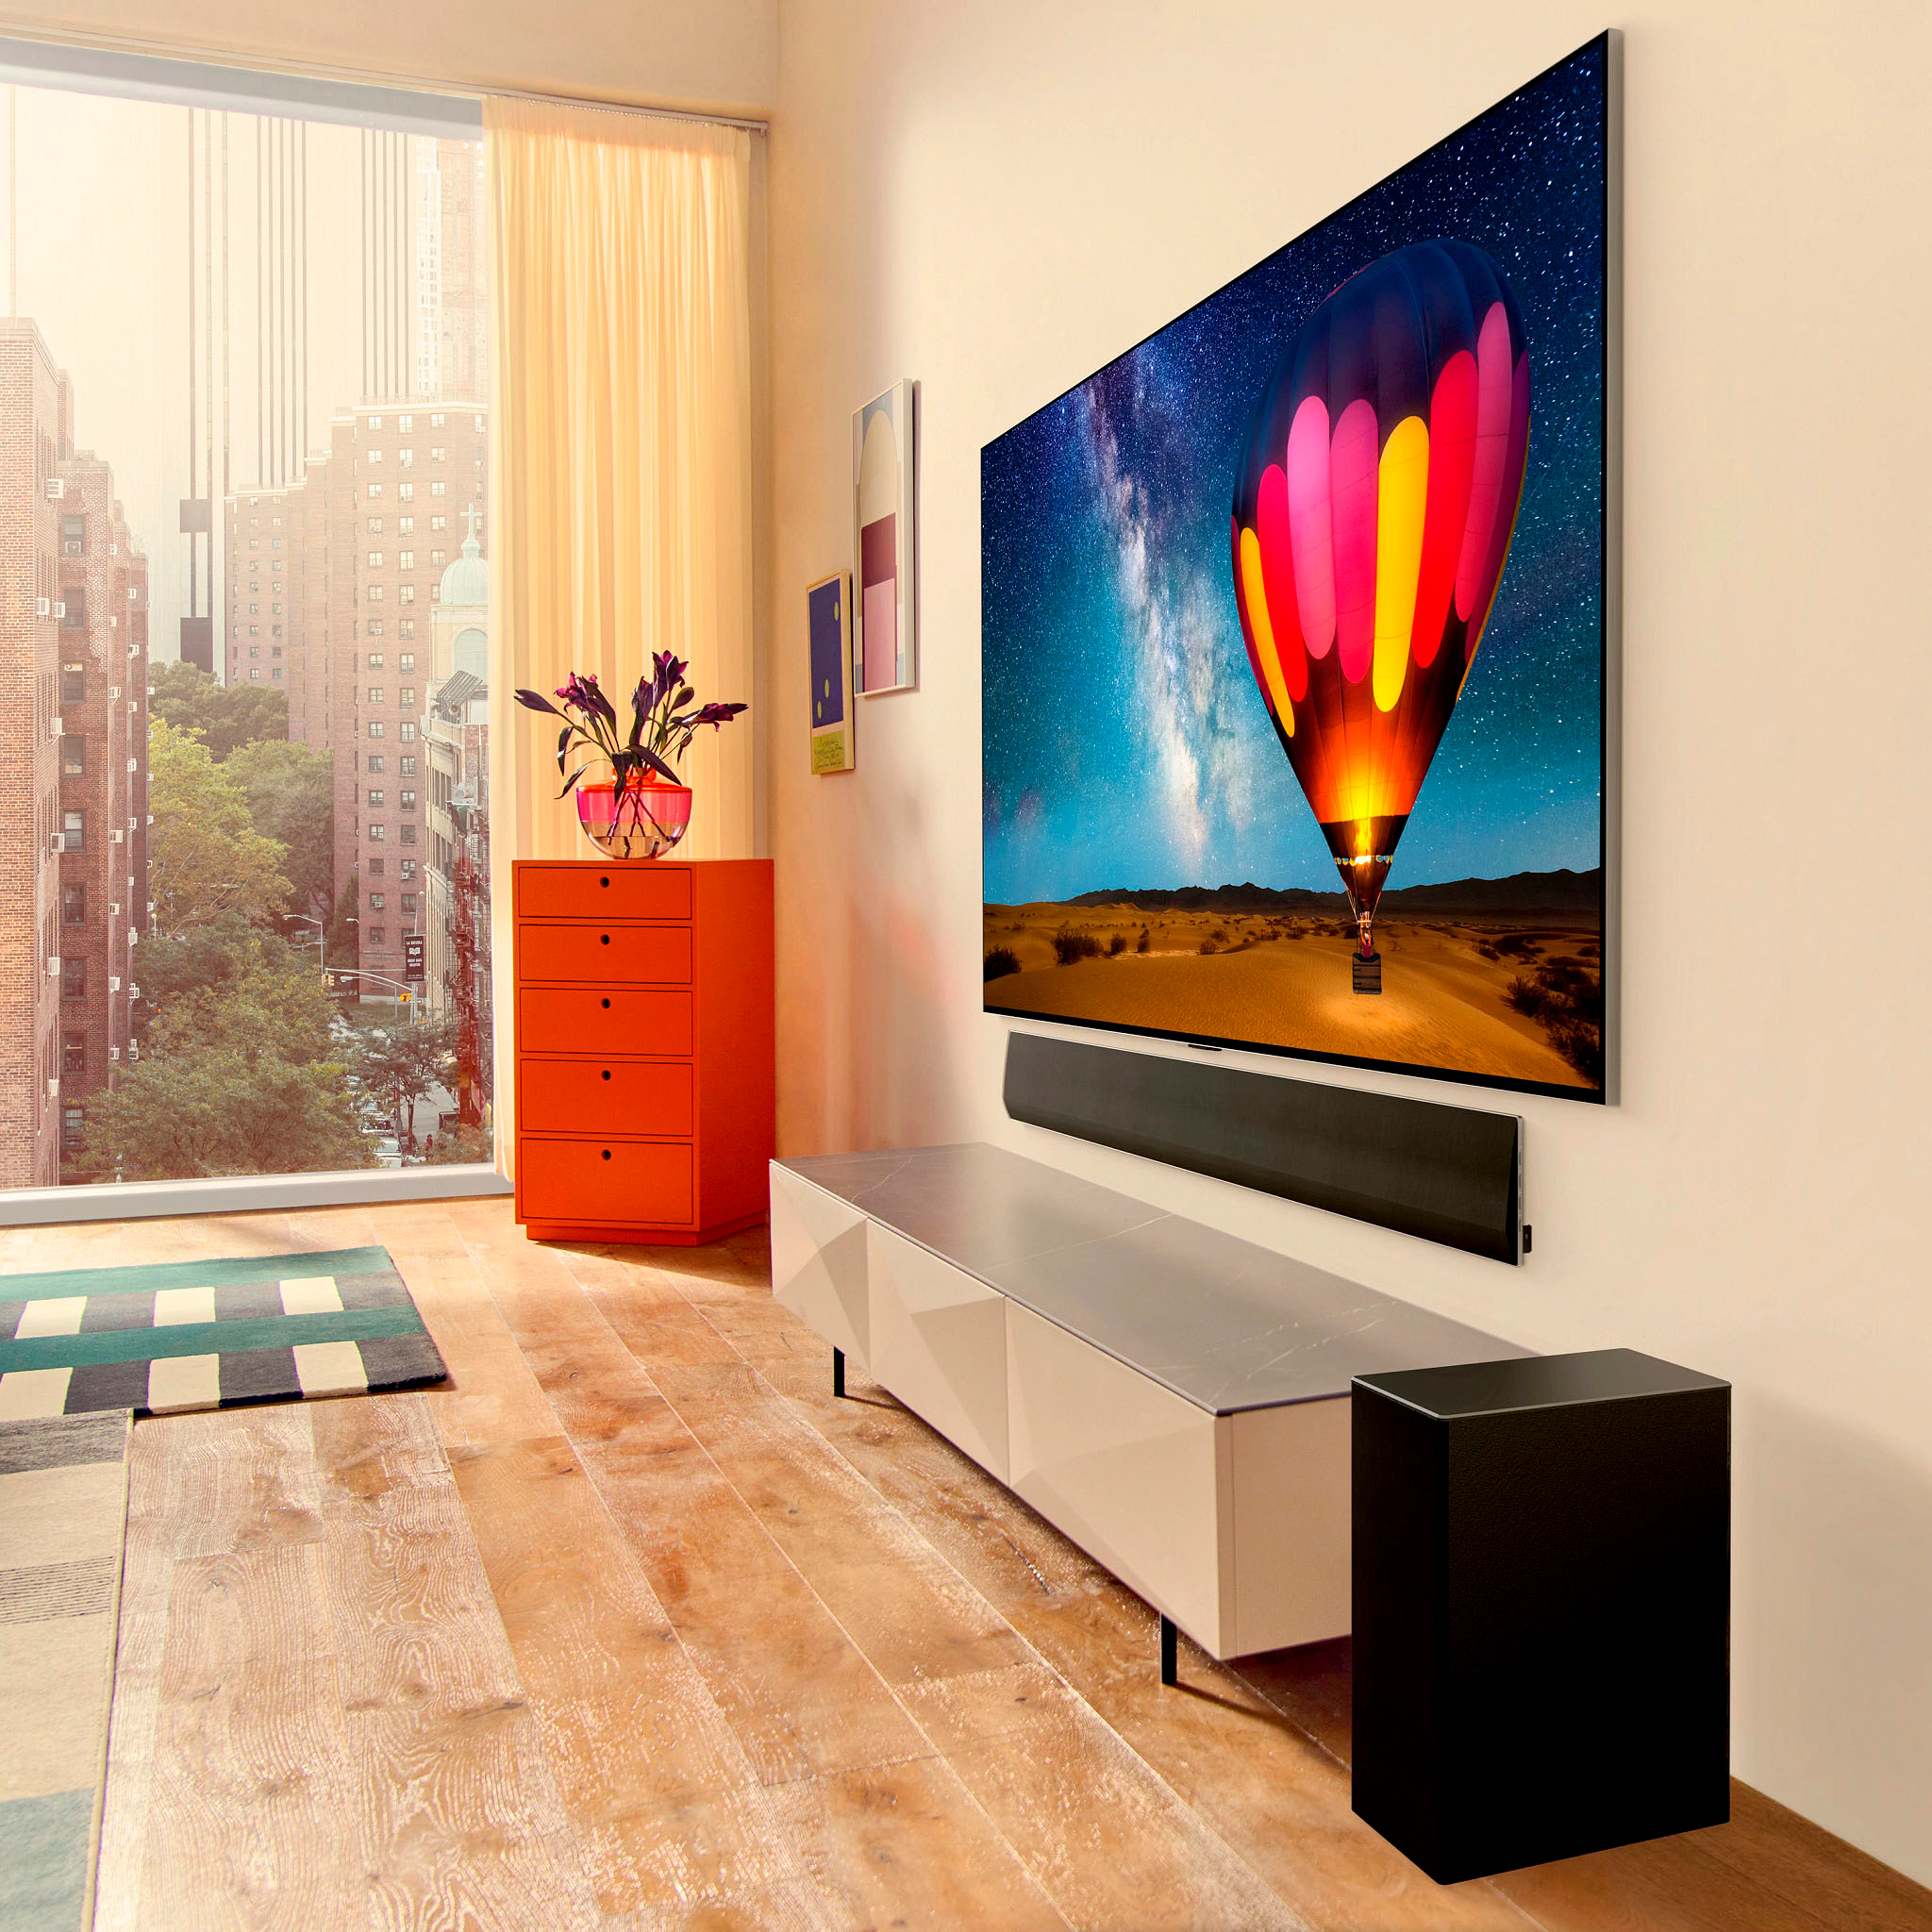 LG 65 Class G3 Series OLED 4K UHD Smart webOS TV with One Wall Design  OLED65G3PUA - Best Buy